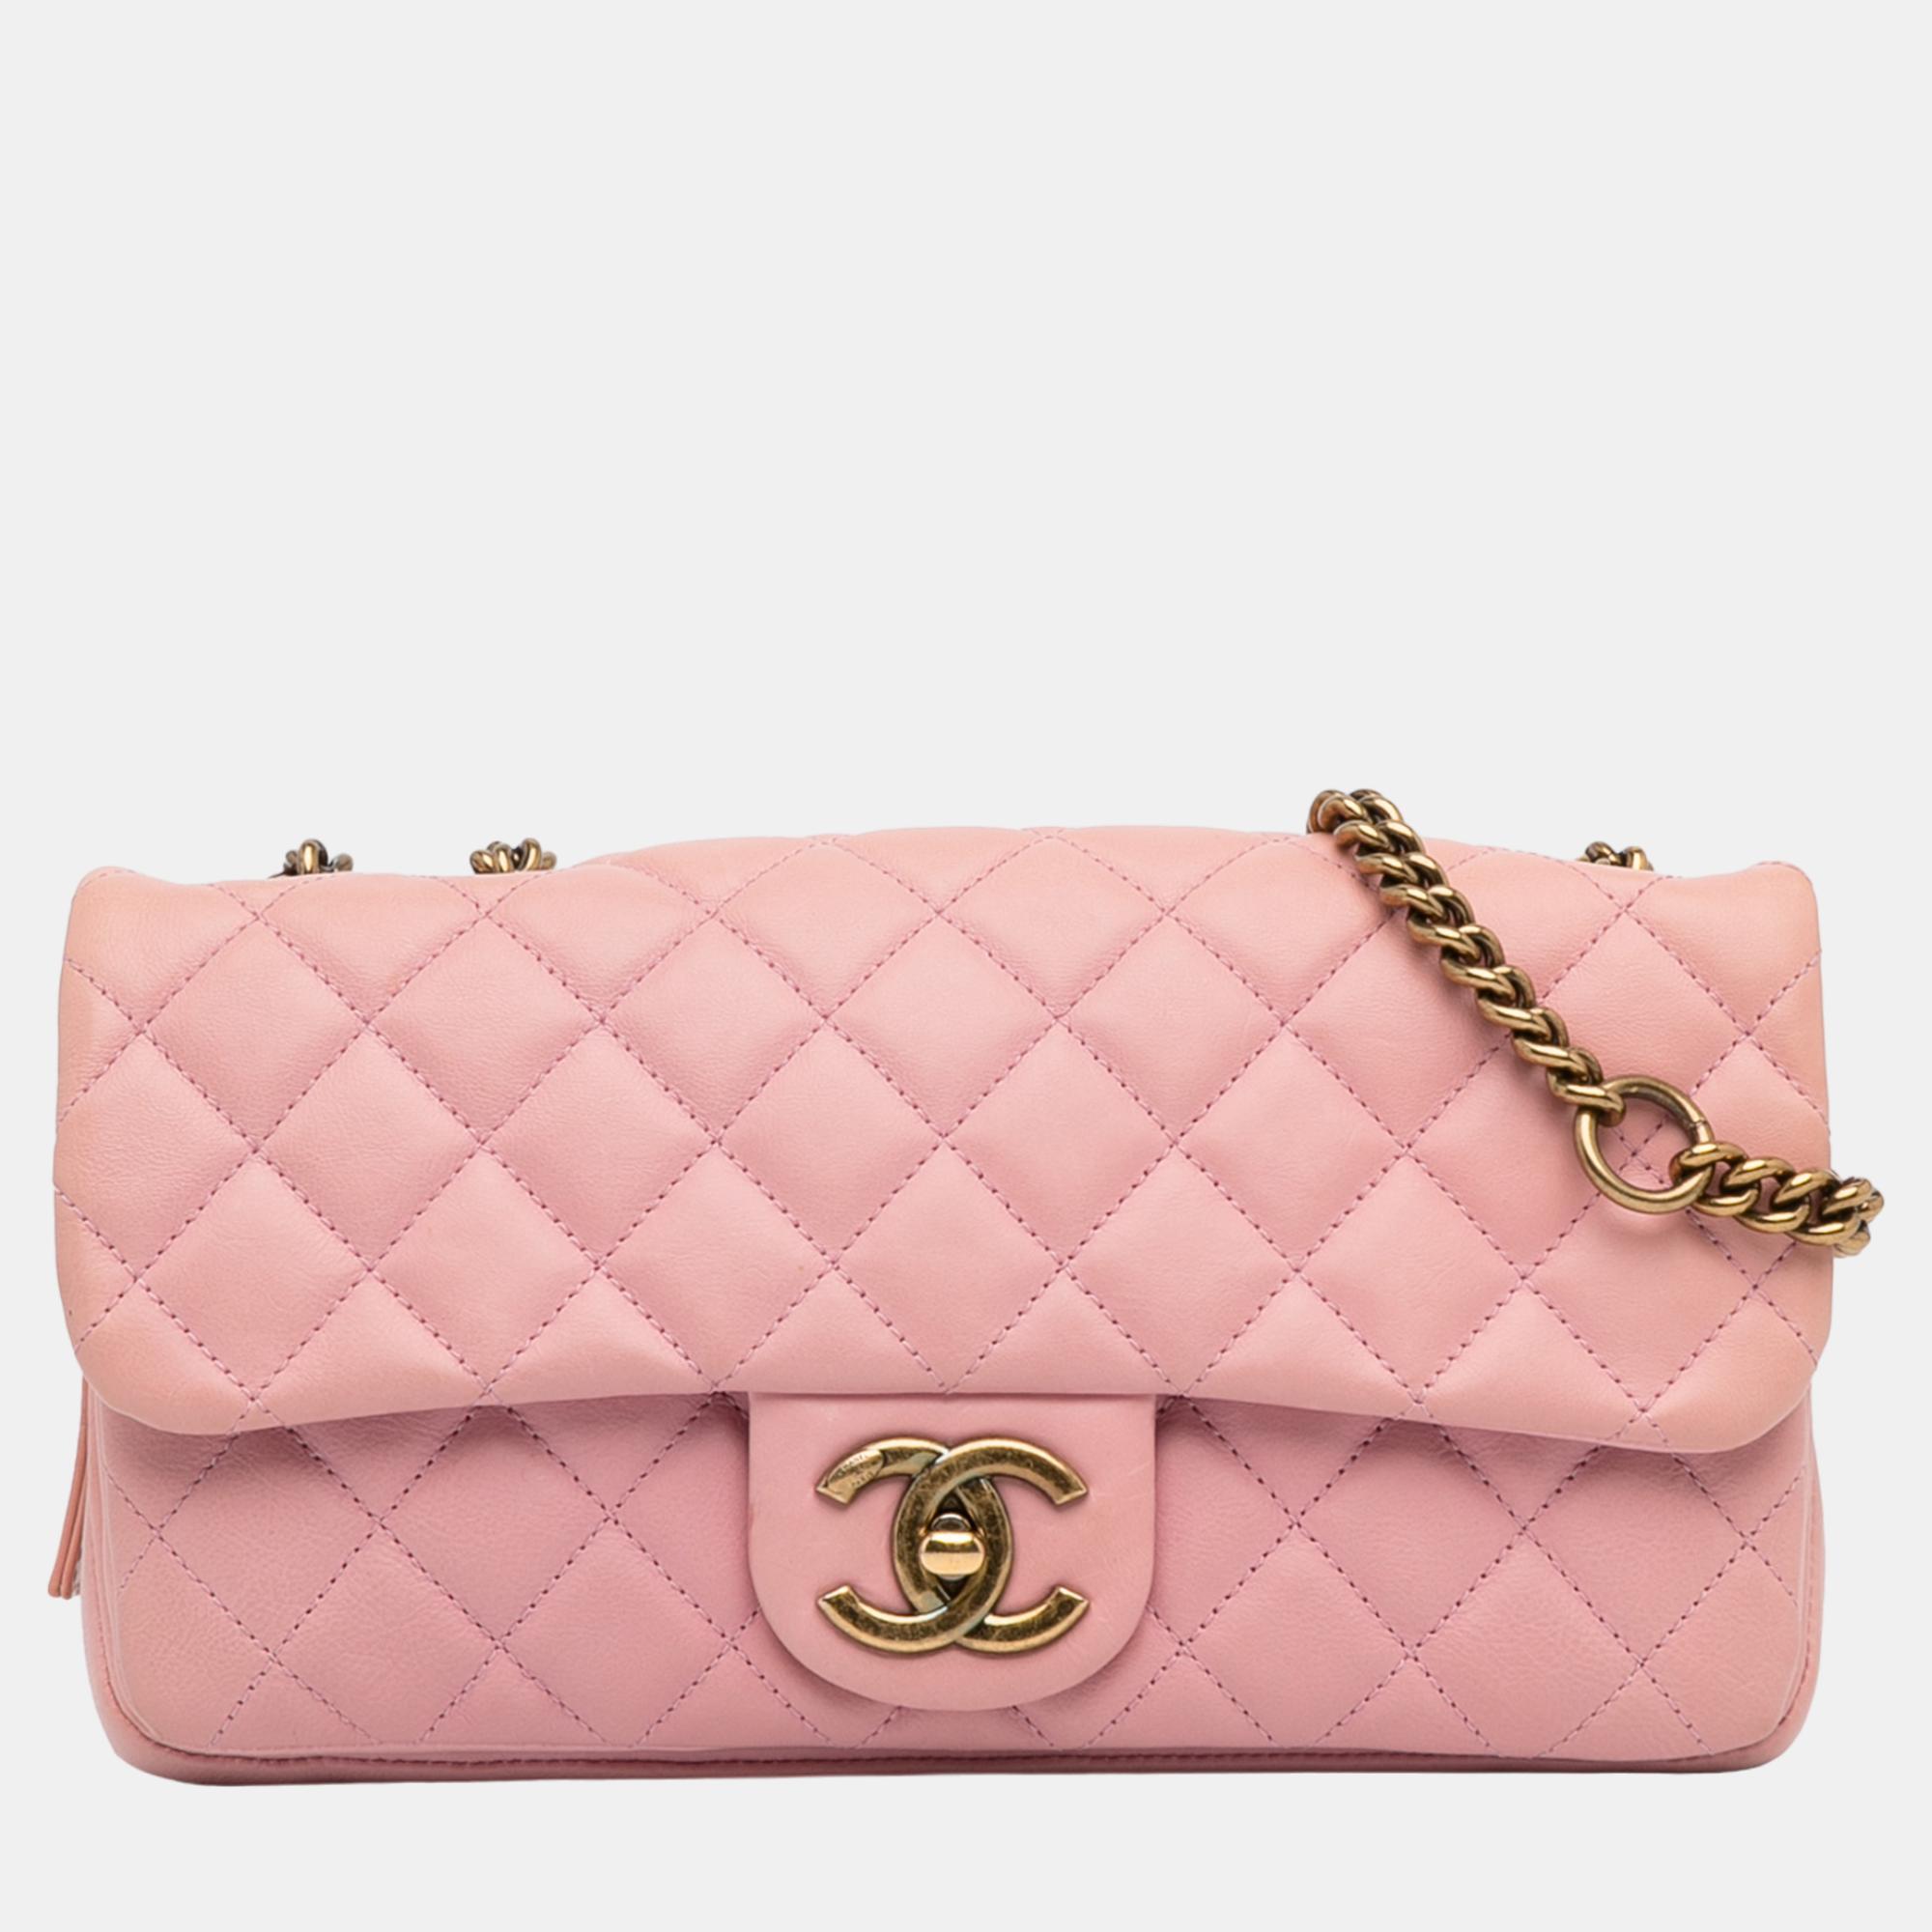 Chanel pink cc quilted calfskin single flap